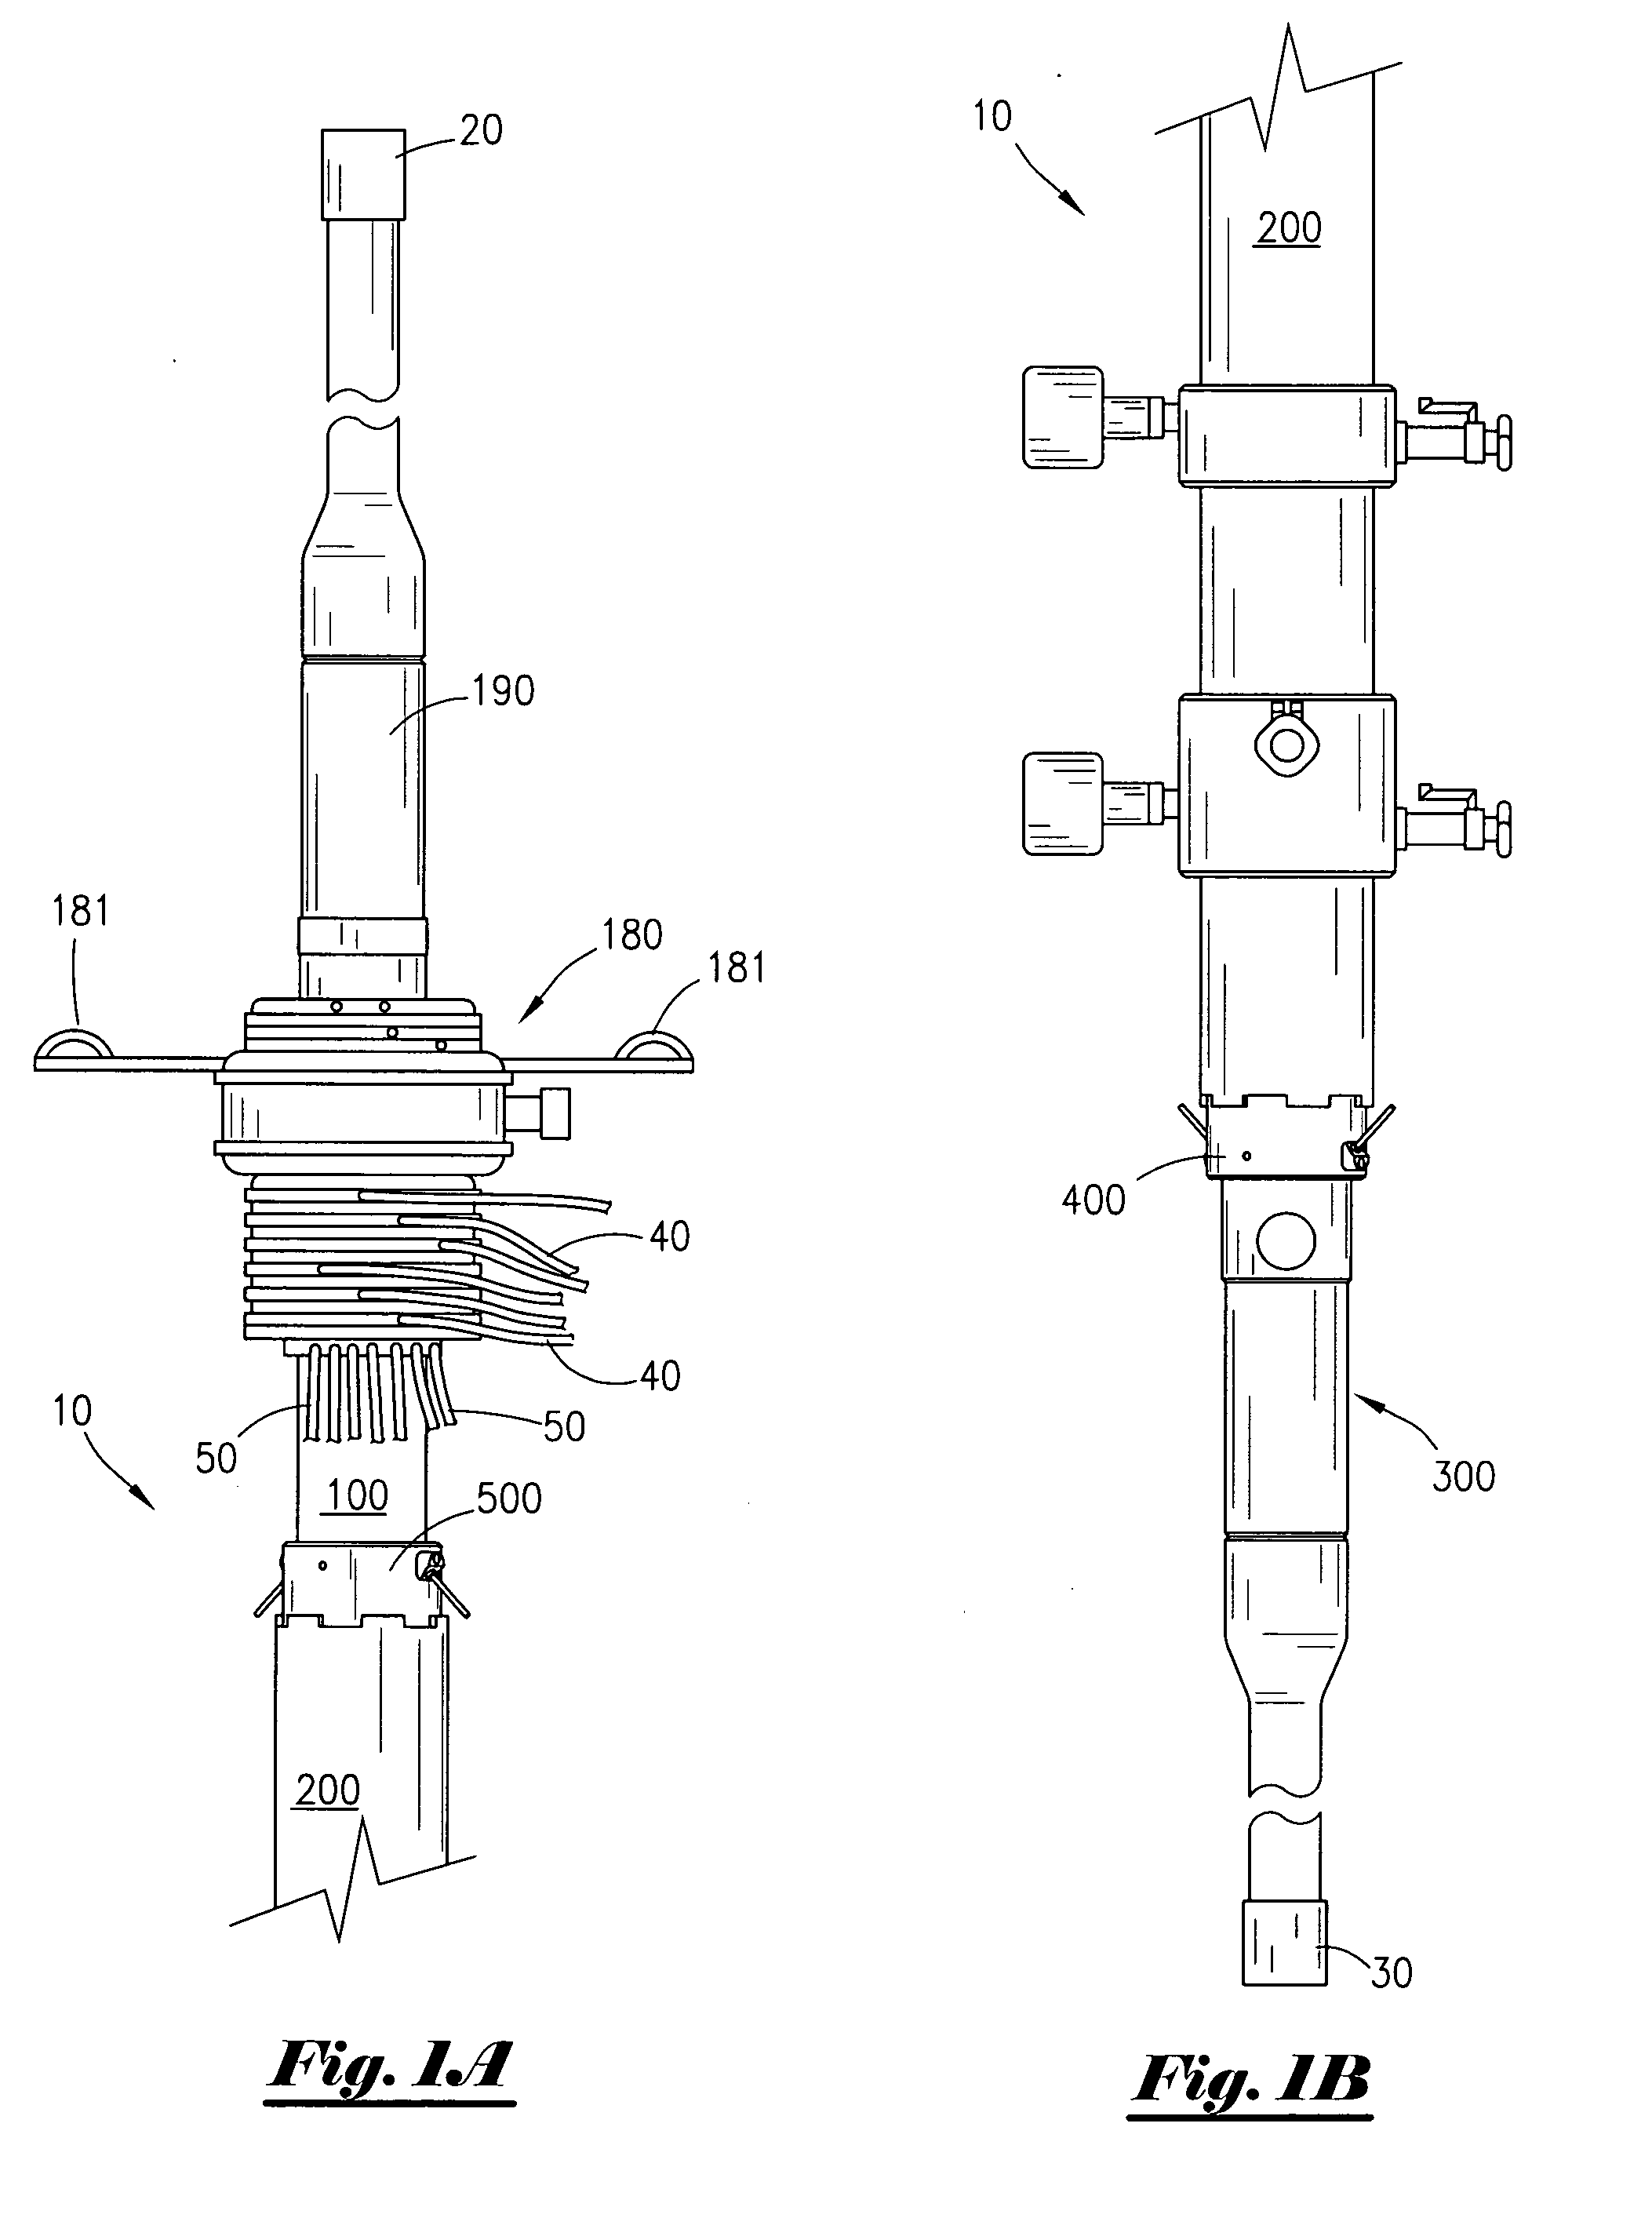 Method and apparatus for performing cementing operations on top drive rigs.